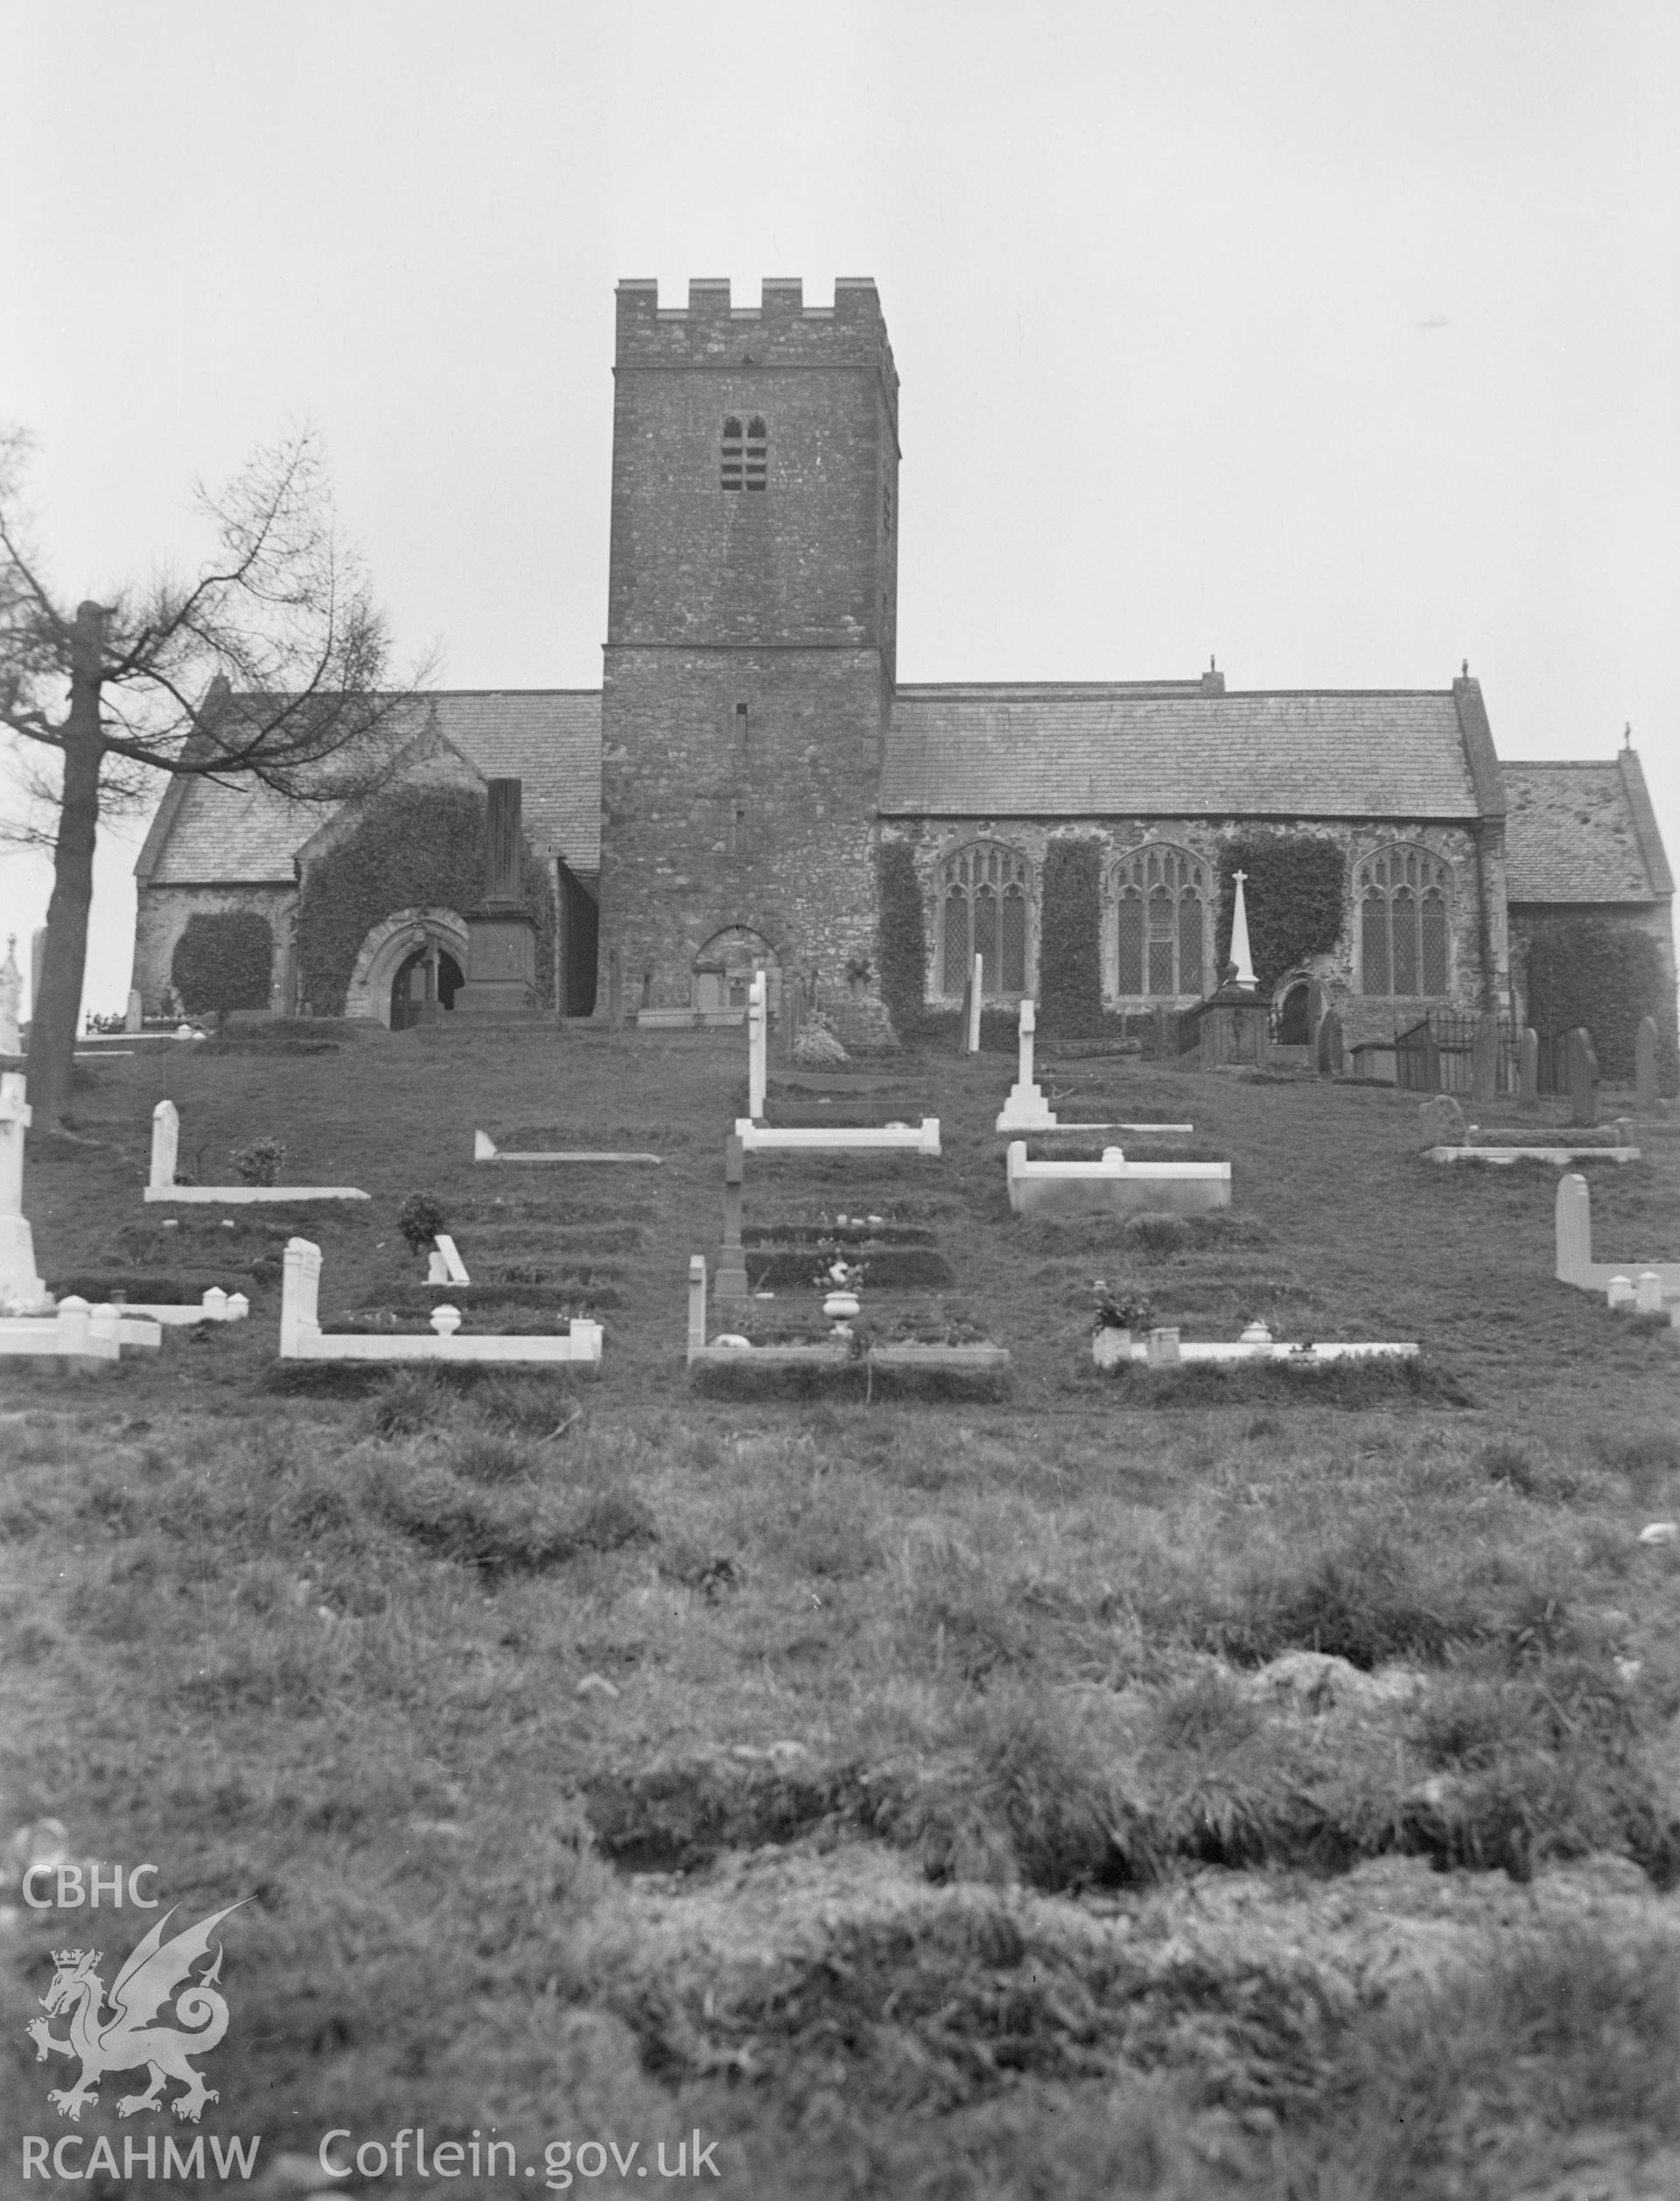 Digital copy of a nitrate negative showing exterior view of St Mellon's Church and churchyard. From the National Building Record Postcard Collection.